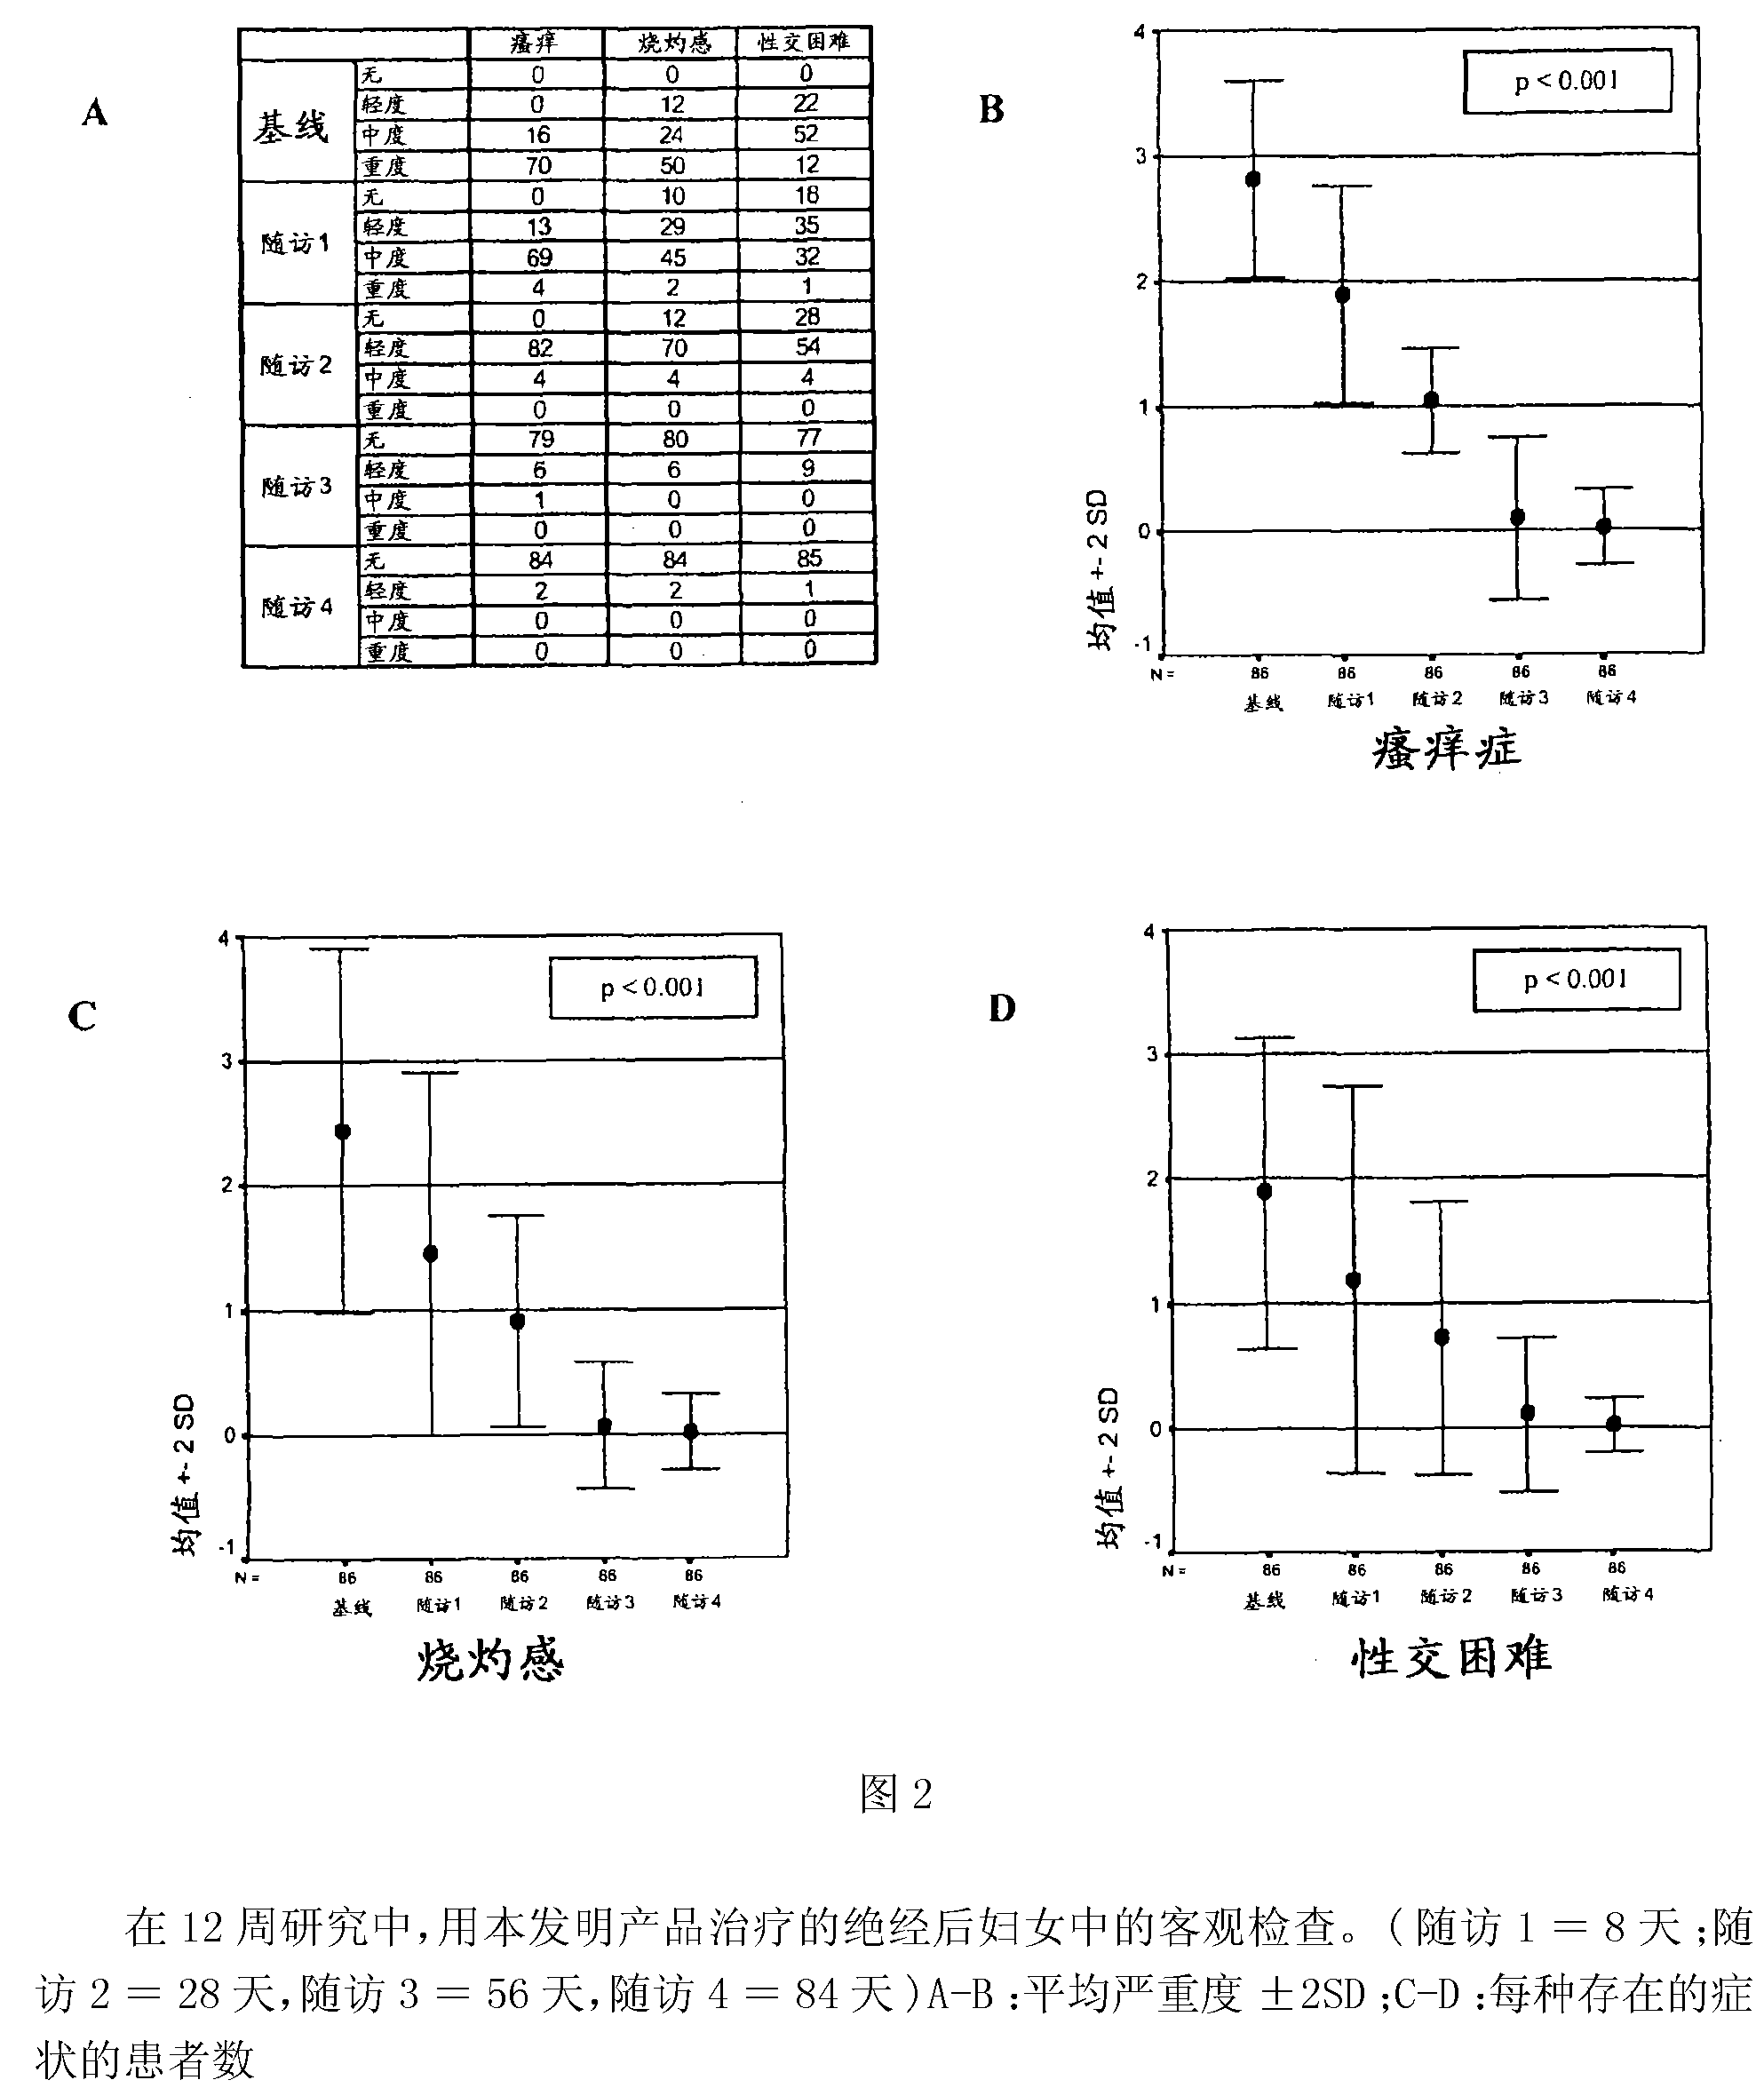 Compositions for vaginal use